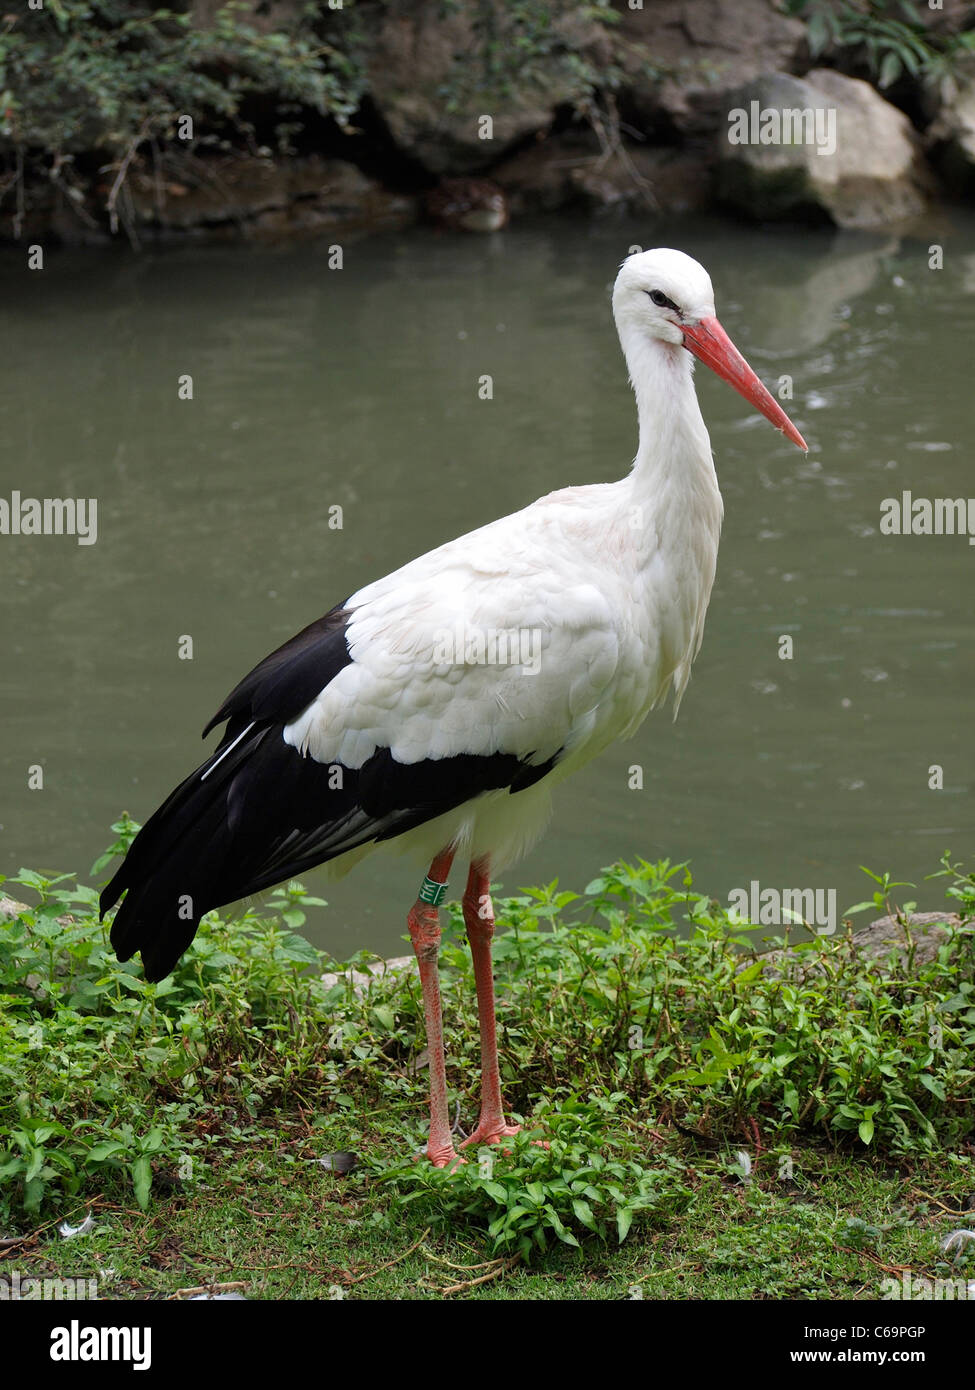 Stork standing by the side of the water, Zooparc de Beauval zoo, Loire valley, France Stock Photo